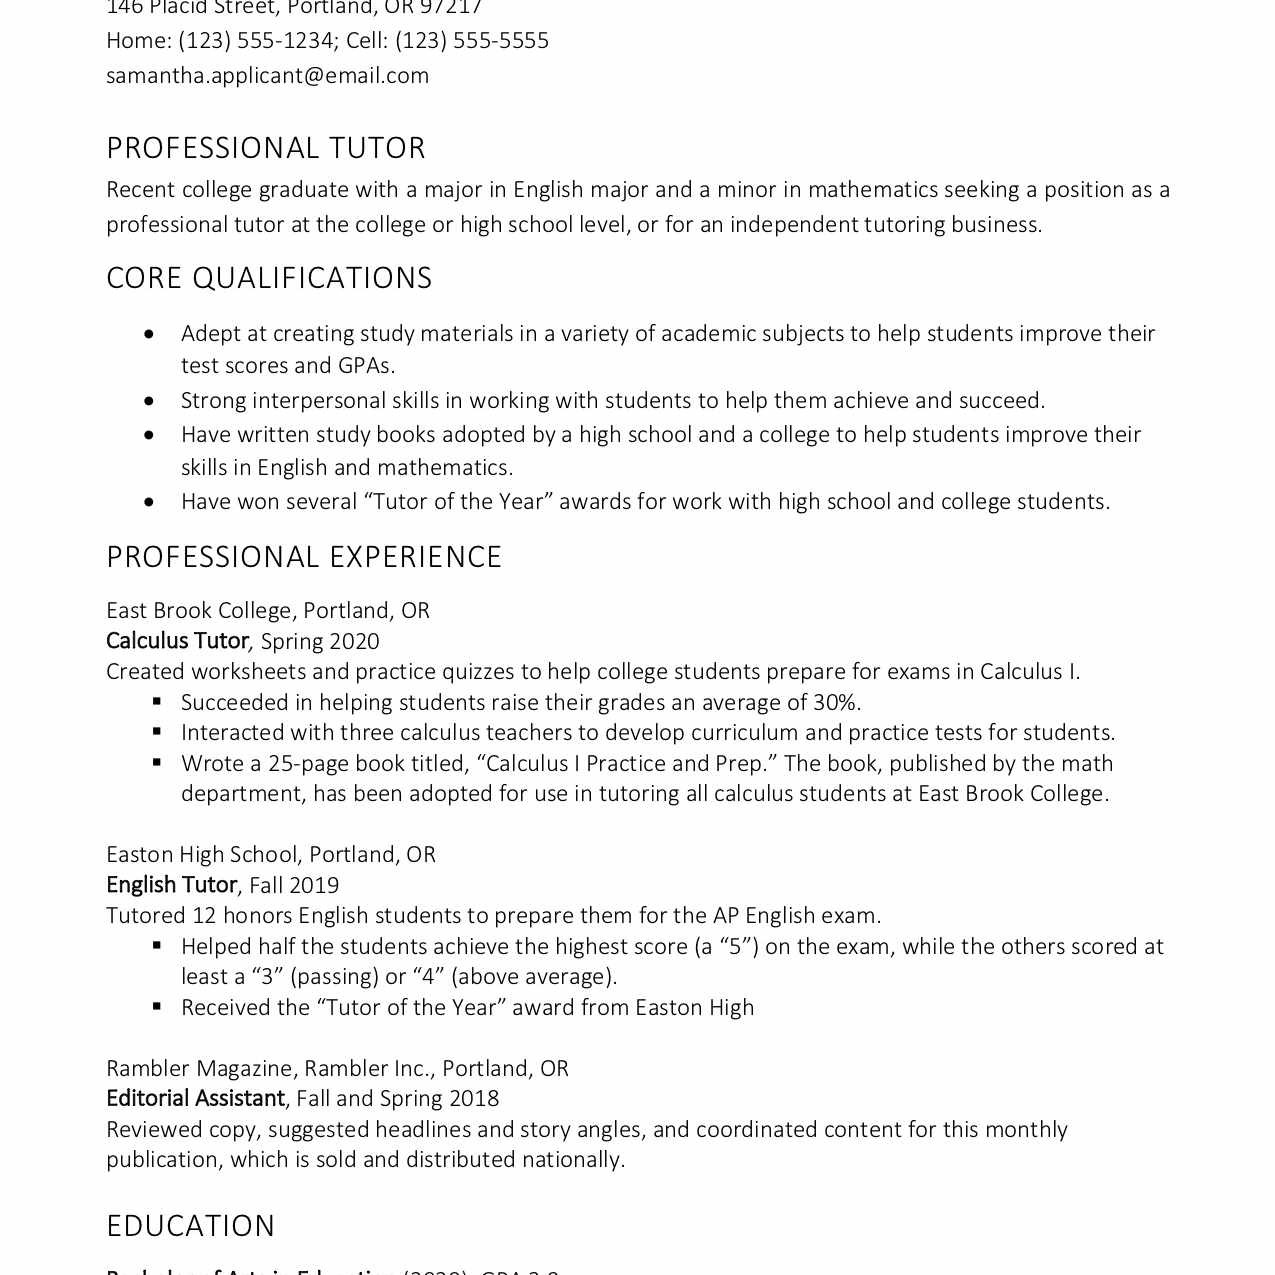 Sample Resume for Online English Tutor without Experience Tutor Resume and Cover Letter Examples